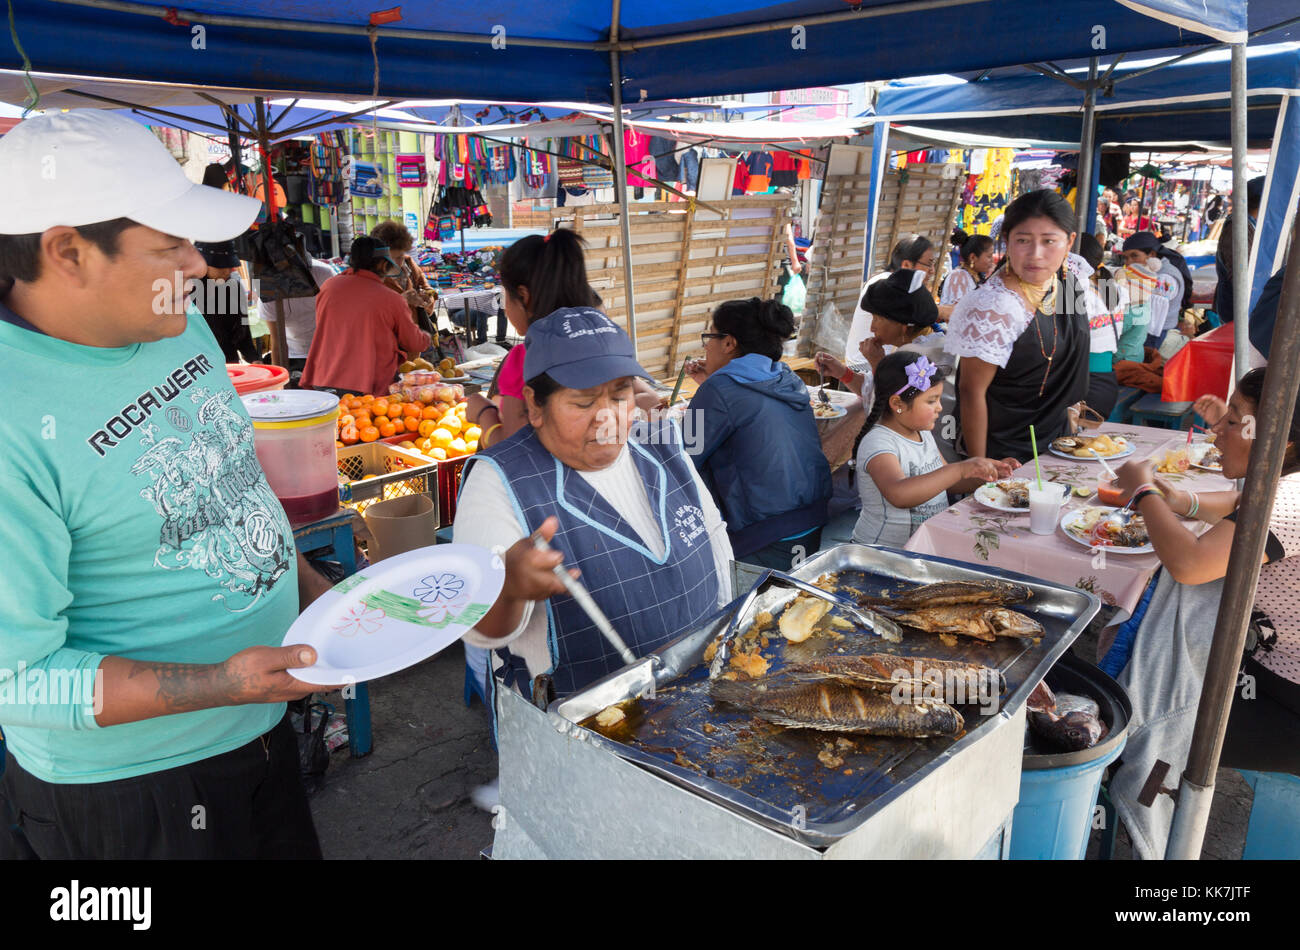 People buying and eating food including fish; Otavalo food market, Ecuador, South America. Stock Photo